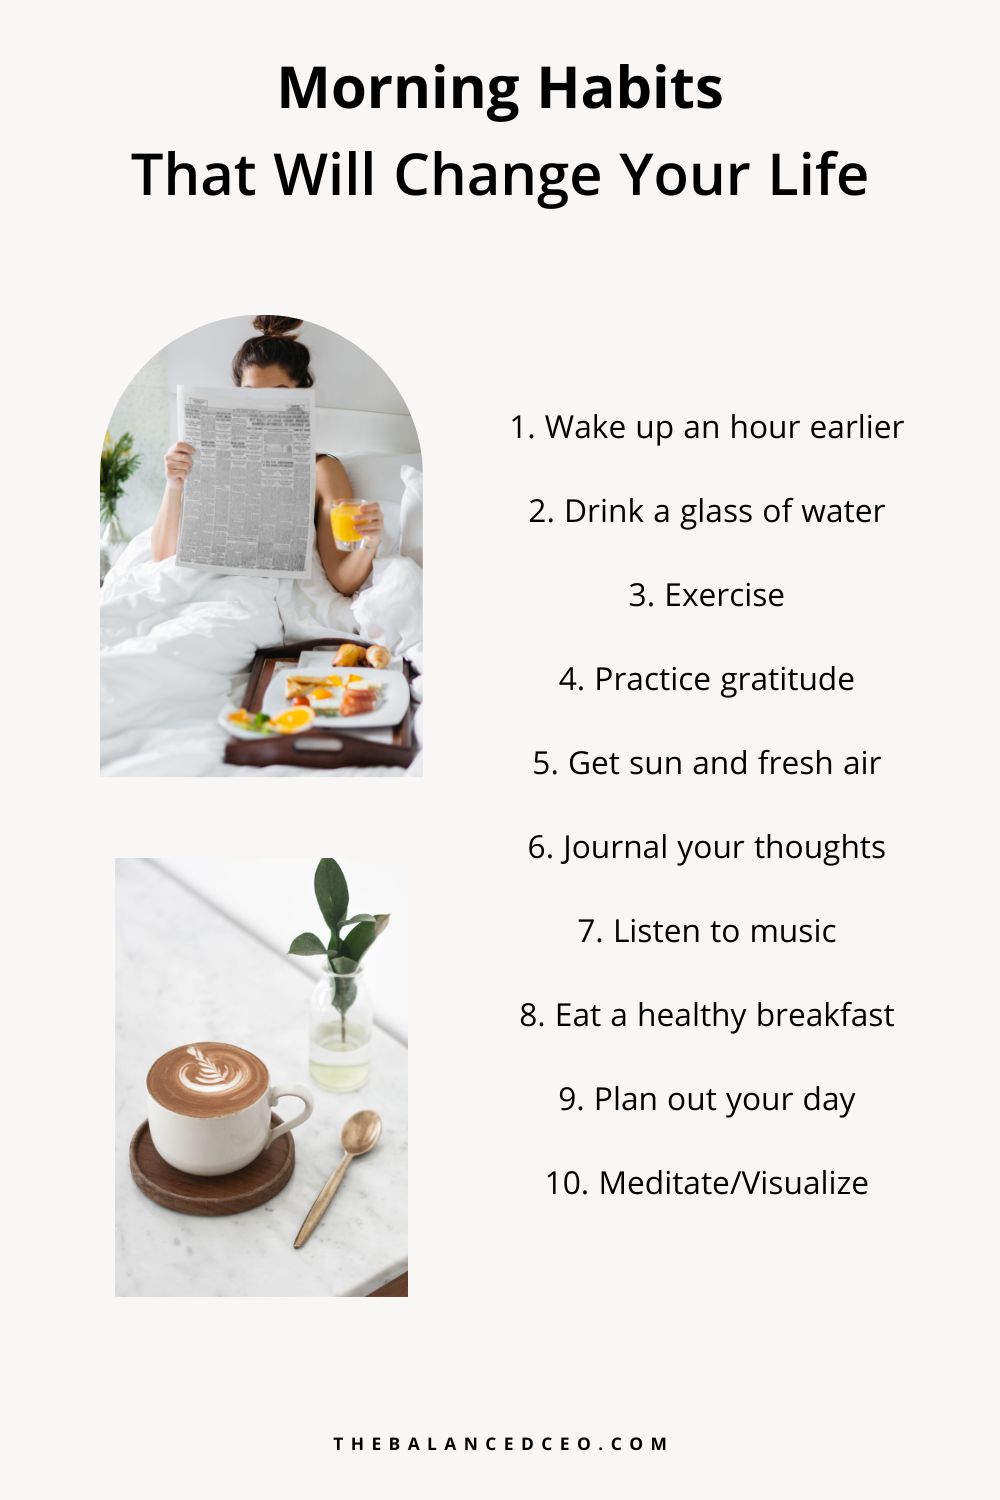 Morning Habits that Will Change Your Life